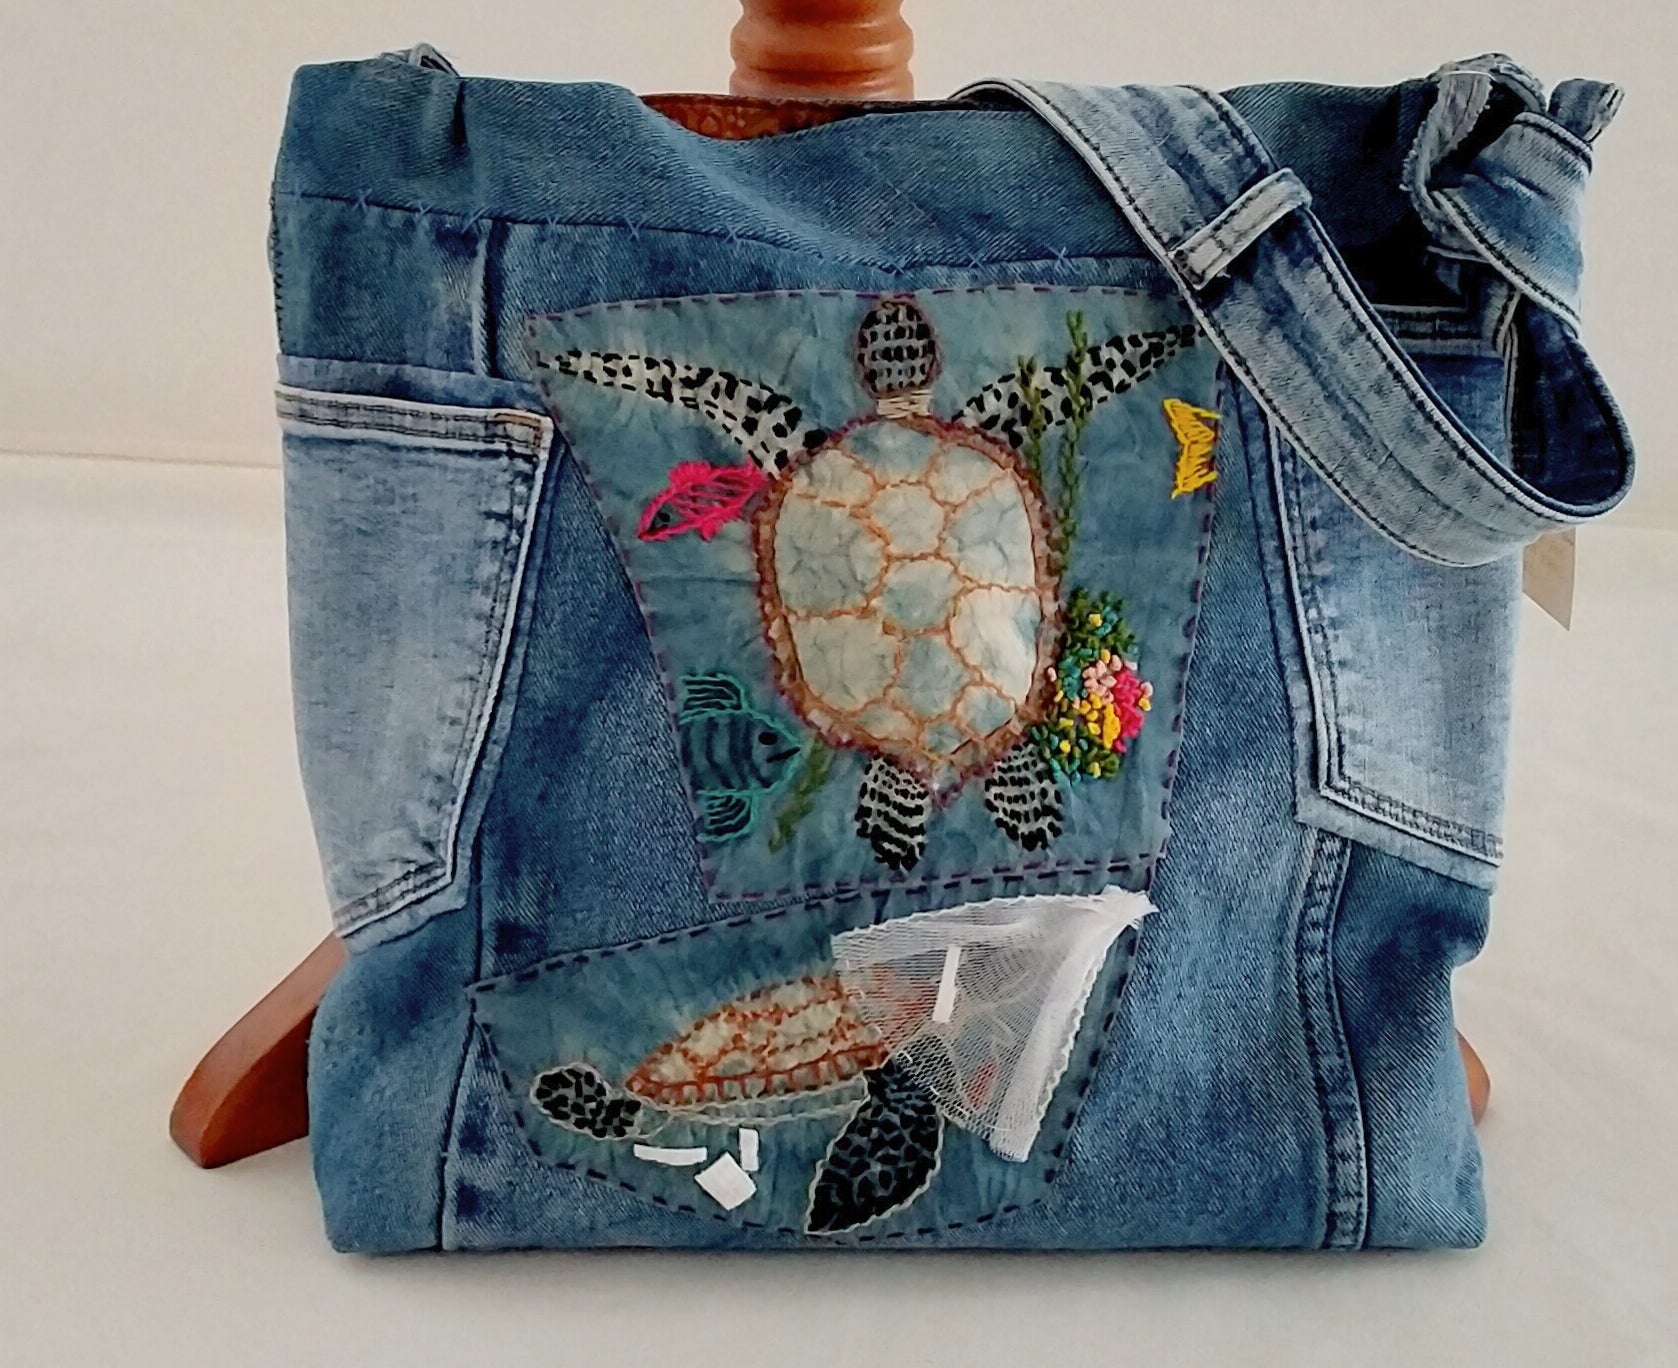 'Slow & Steady' Recycled Jeans Bag handmade by Neelam Singhal